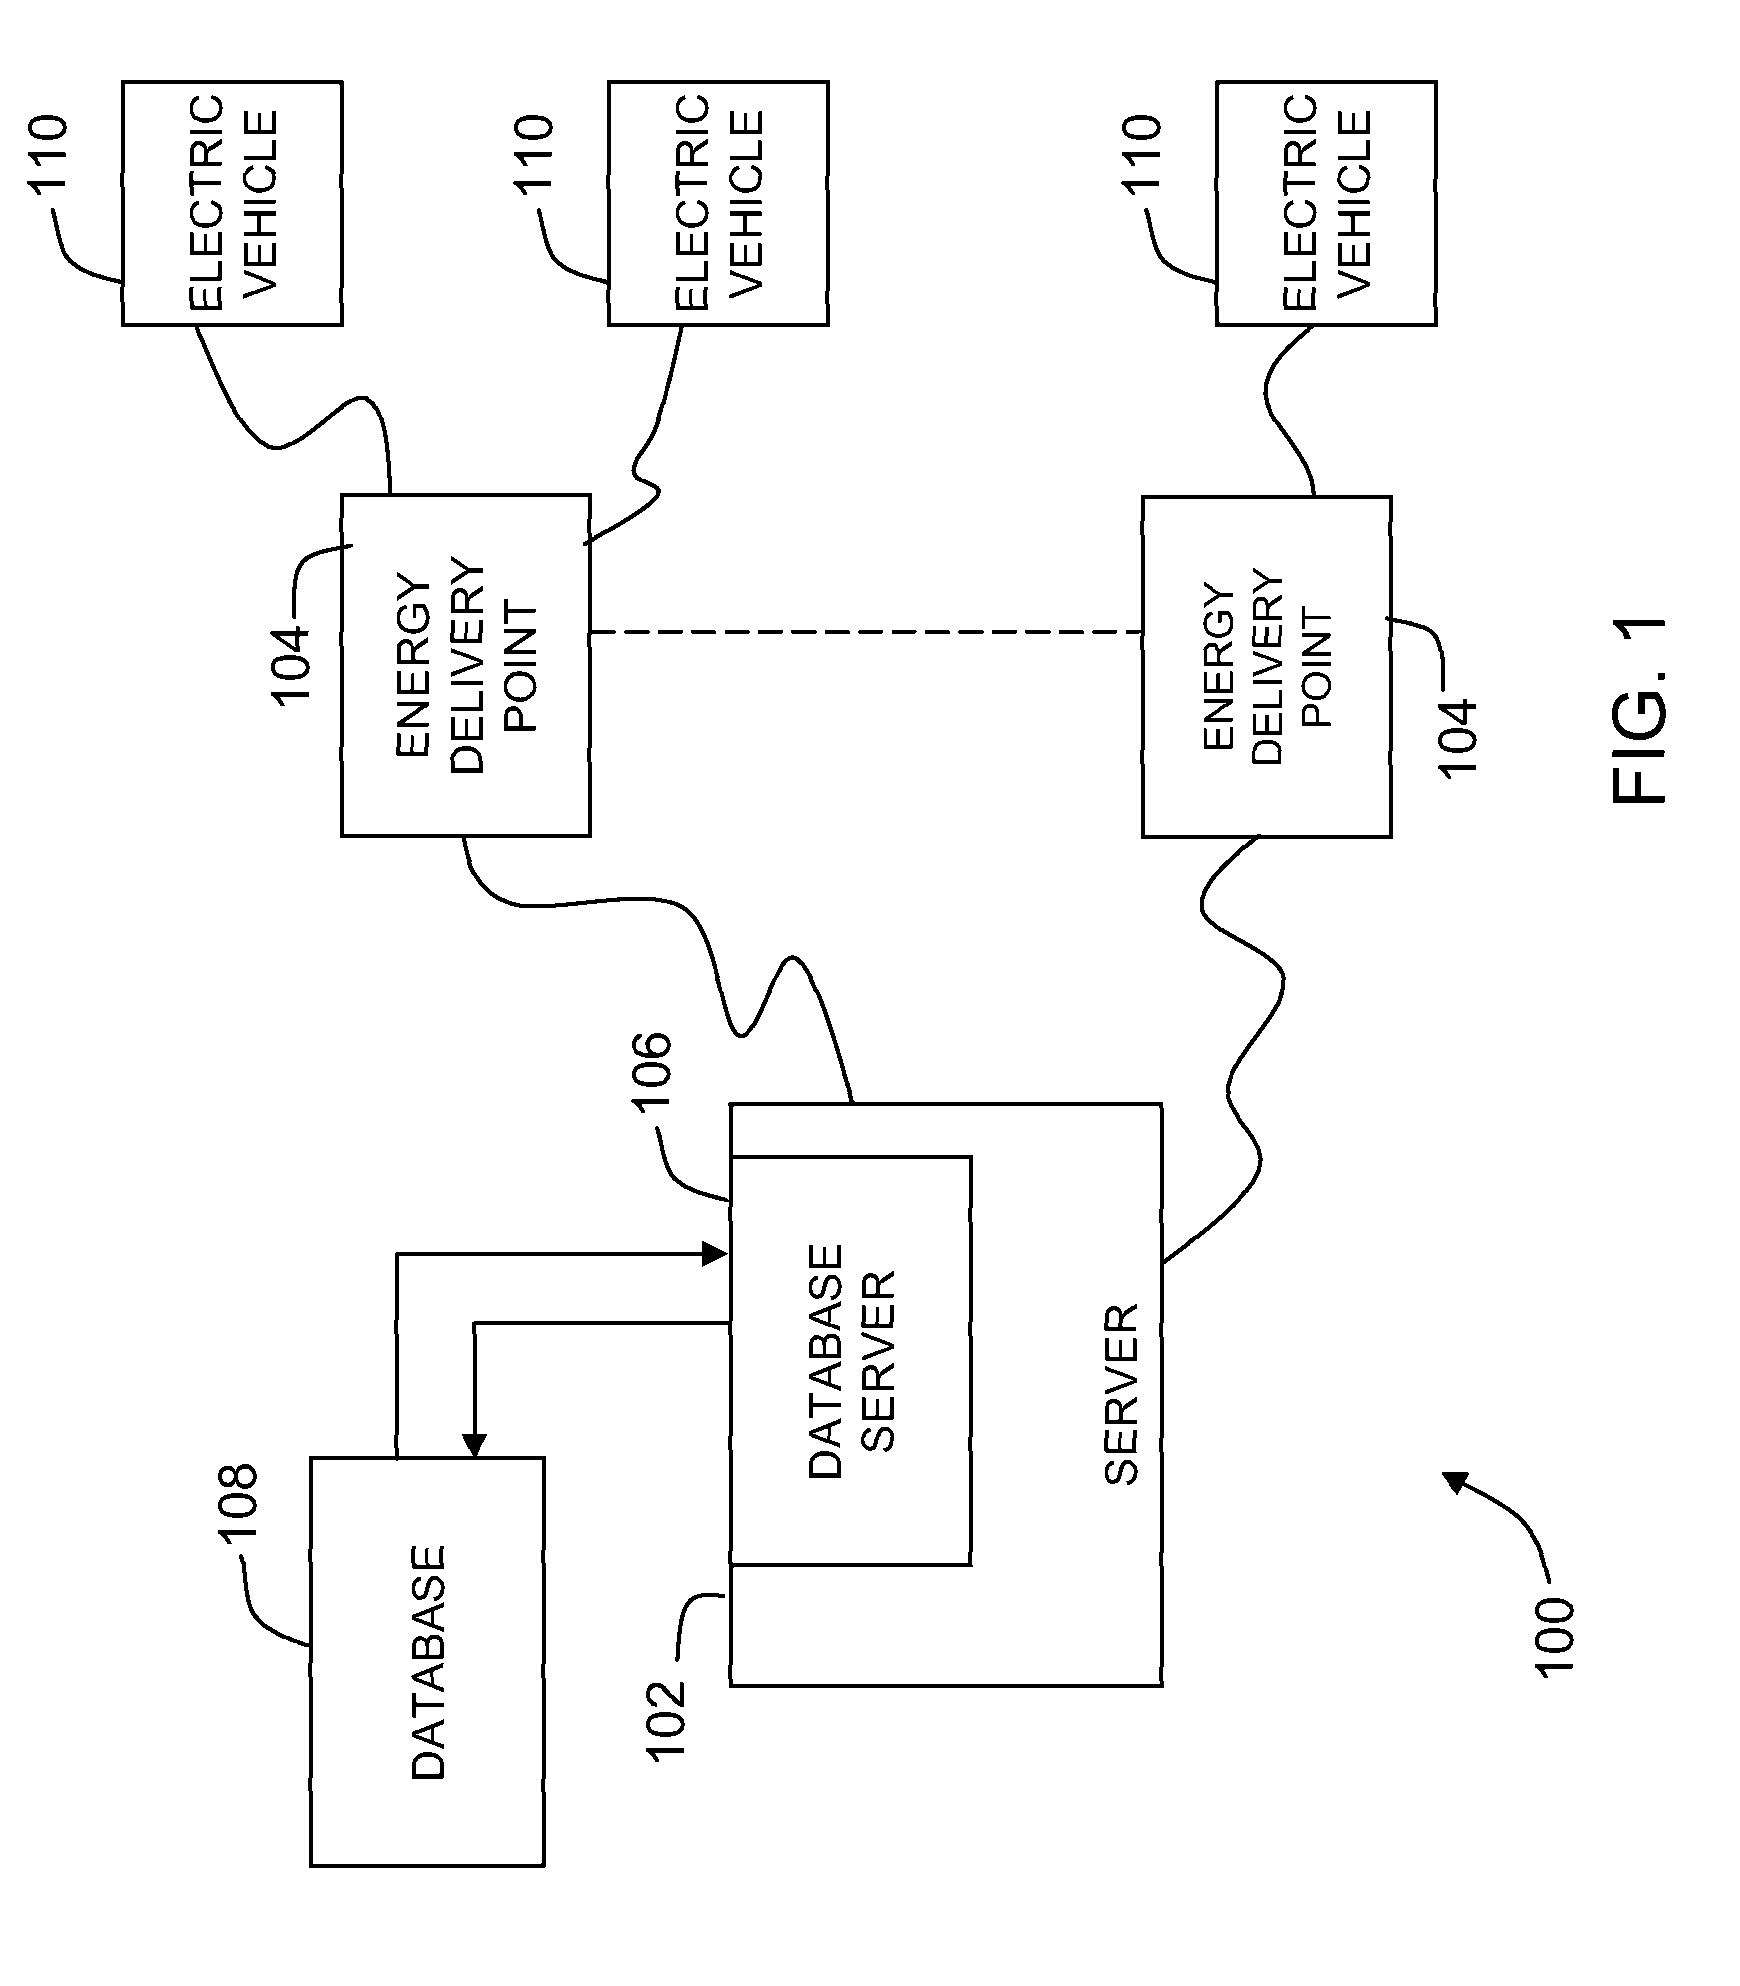 Systems and methods for prepaid electric metering for vehicles